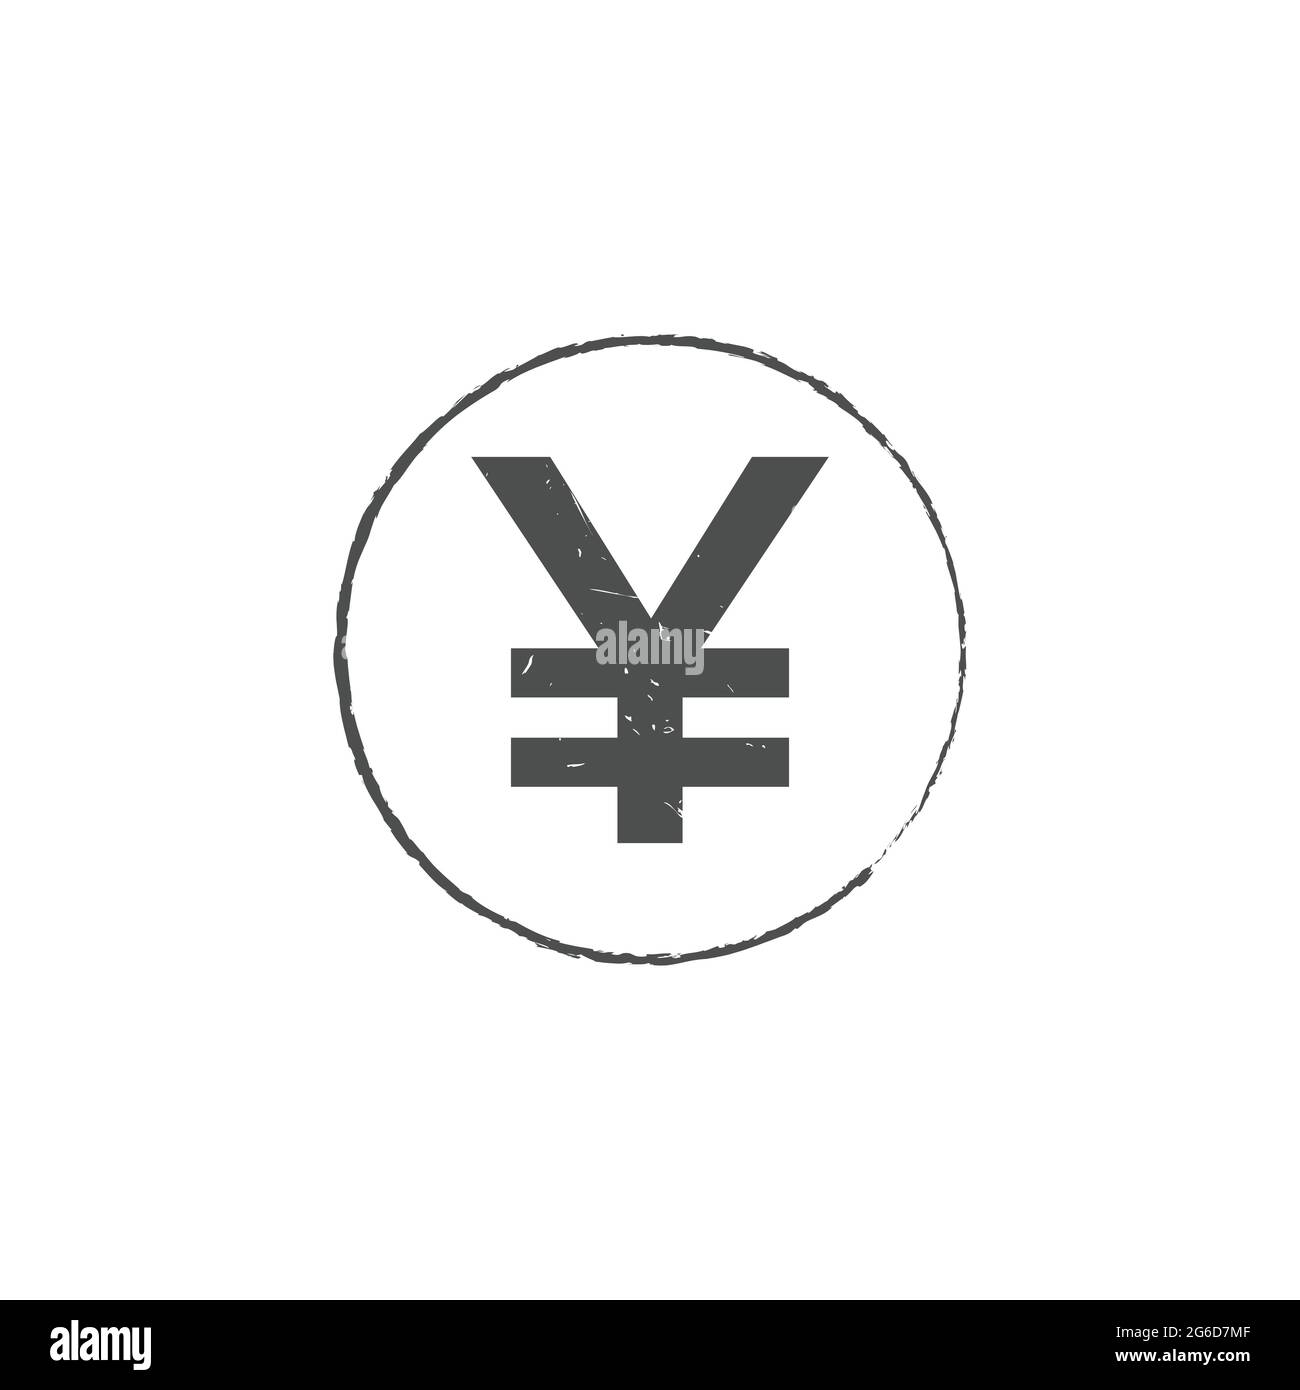 Japan yen JPY grunge stamp seal vector design. Currency mainstream symbol with grunge stamp seal style design Stock Vector